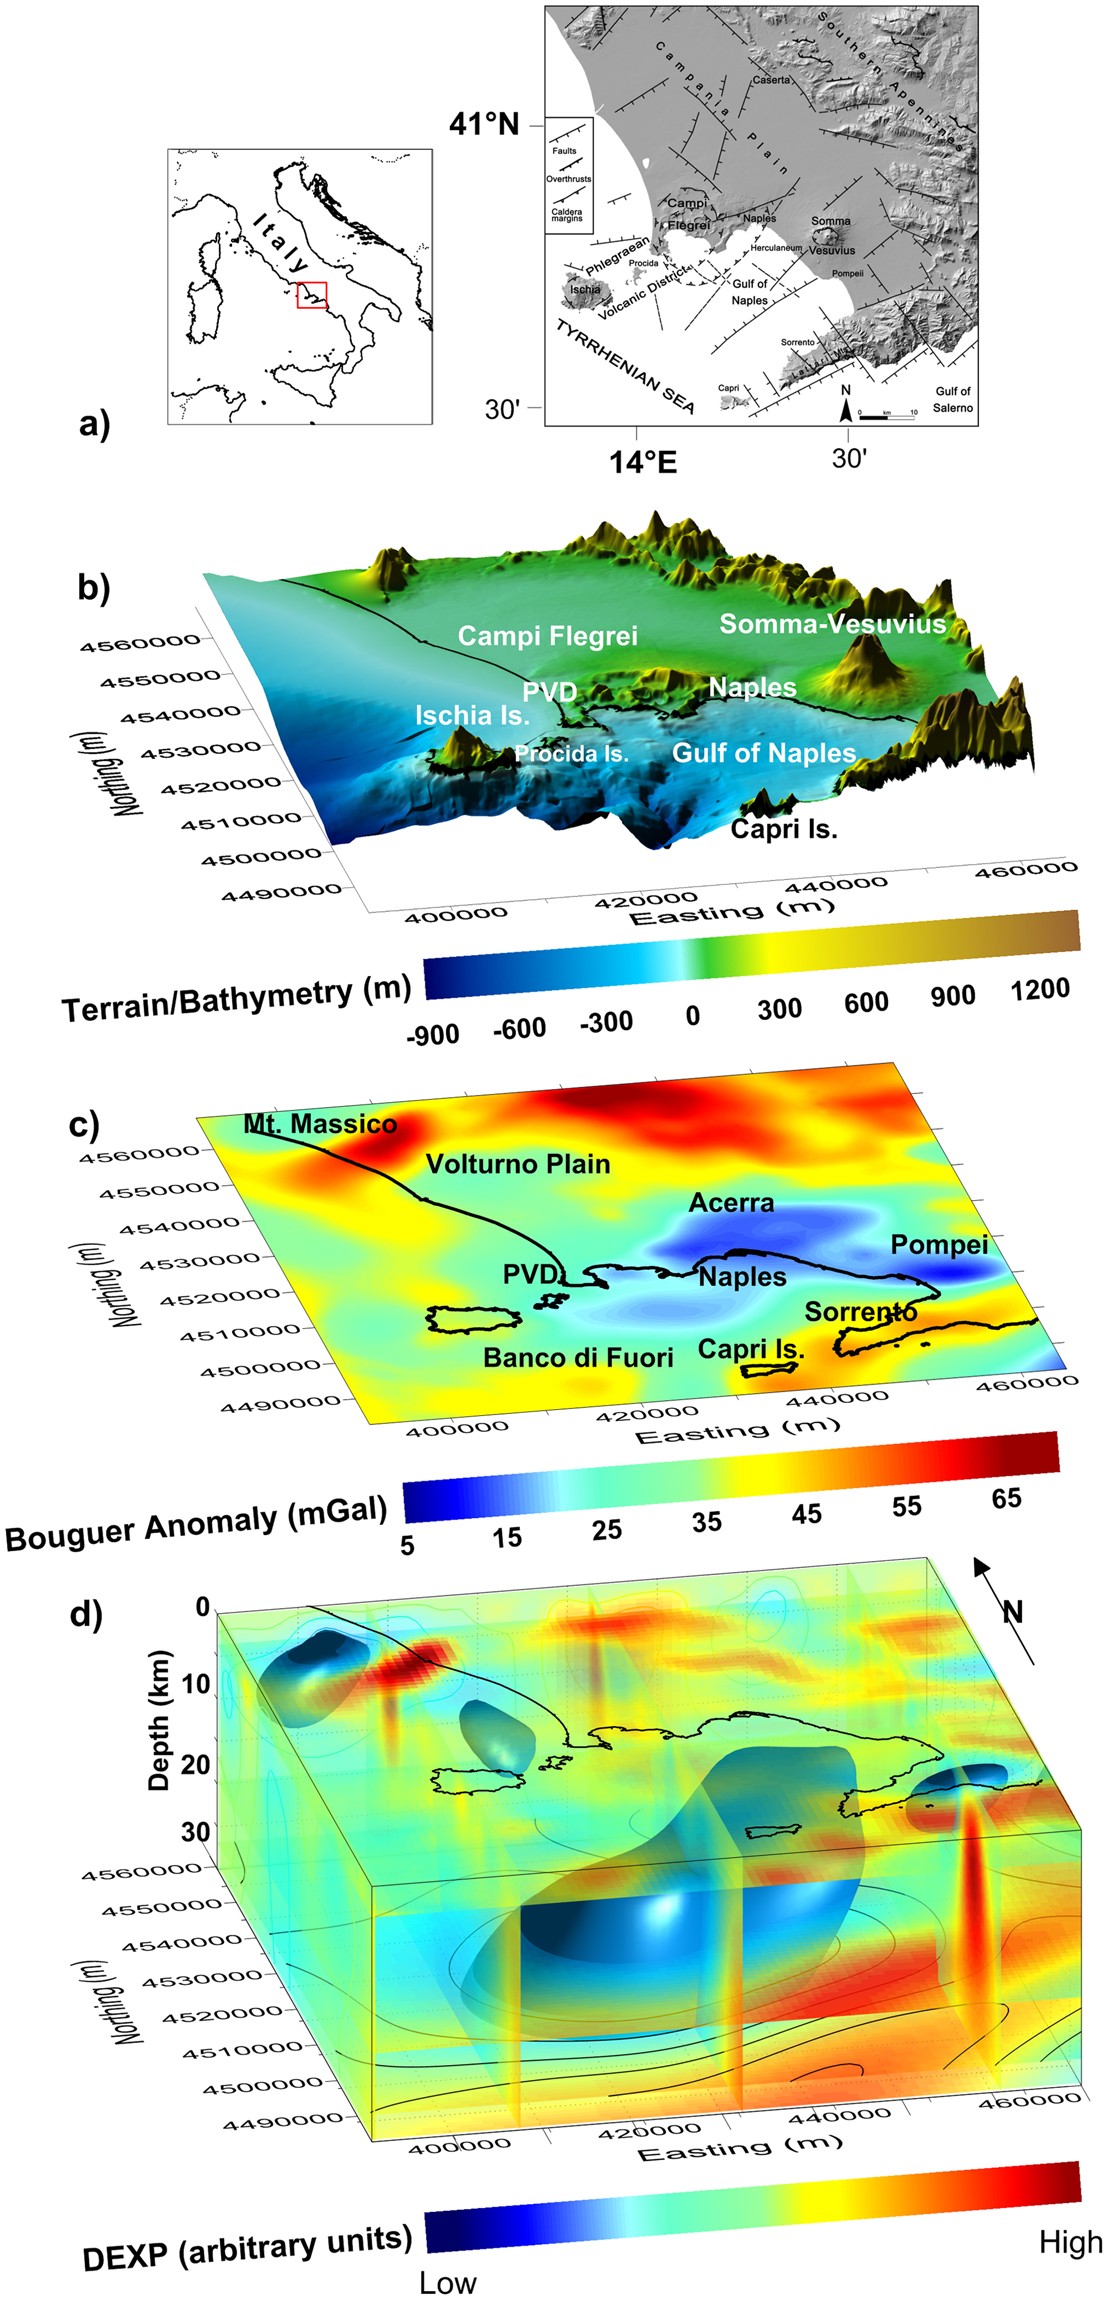 Complete Bouguer anomaly contour map for the gravity measurement points